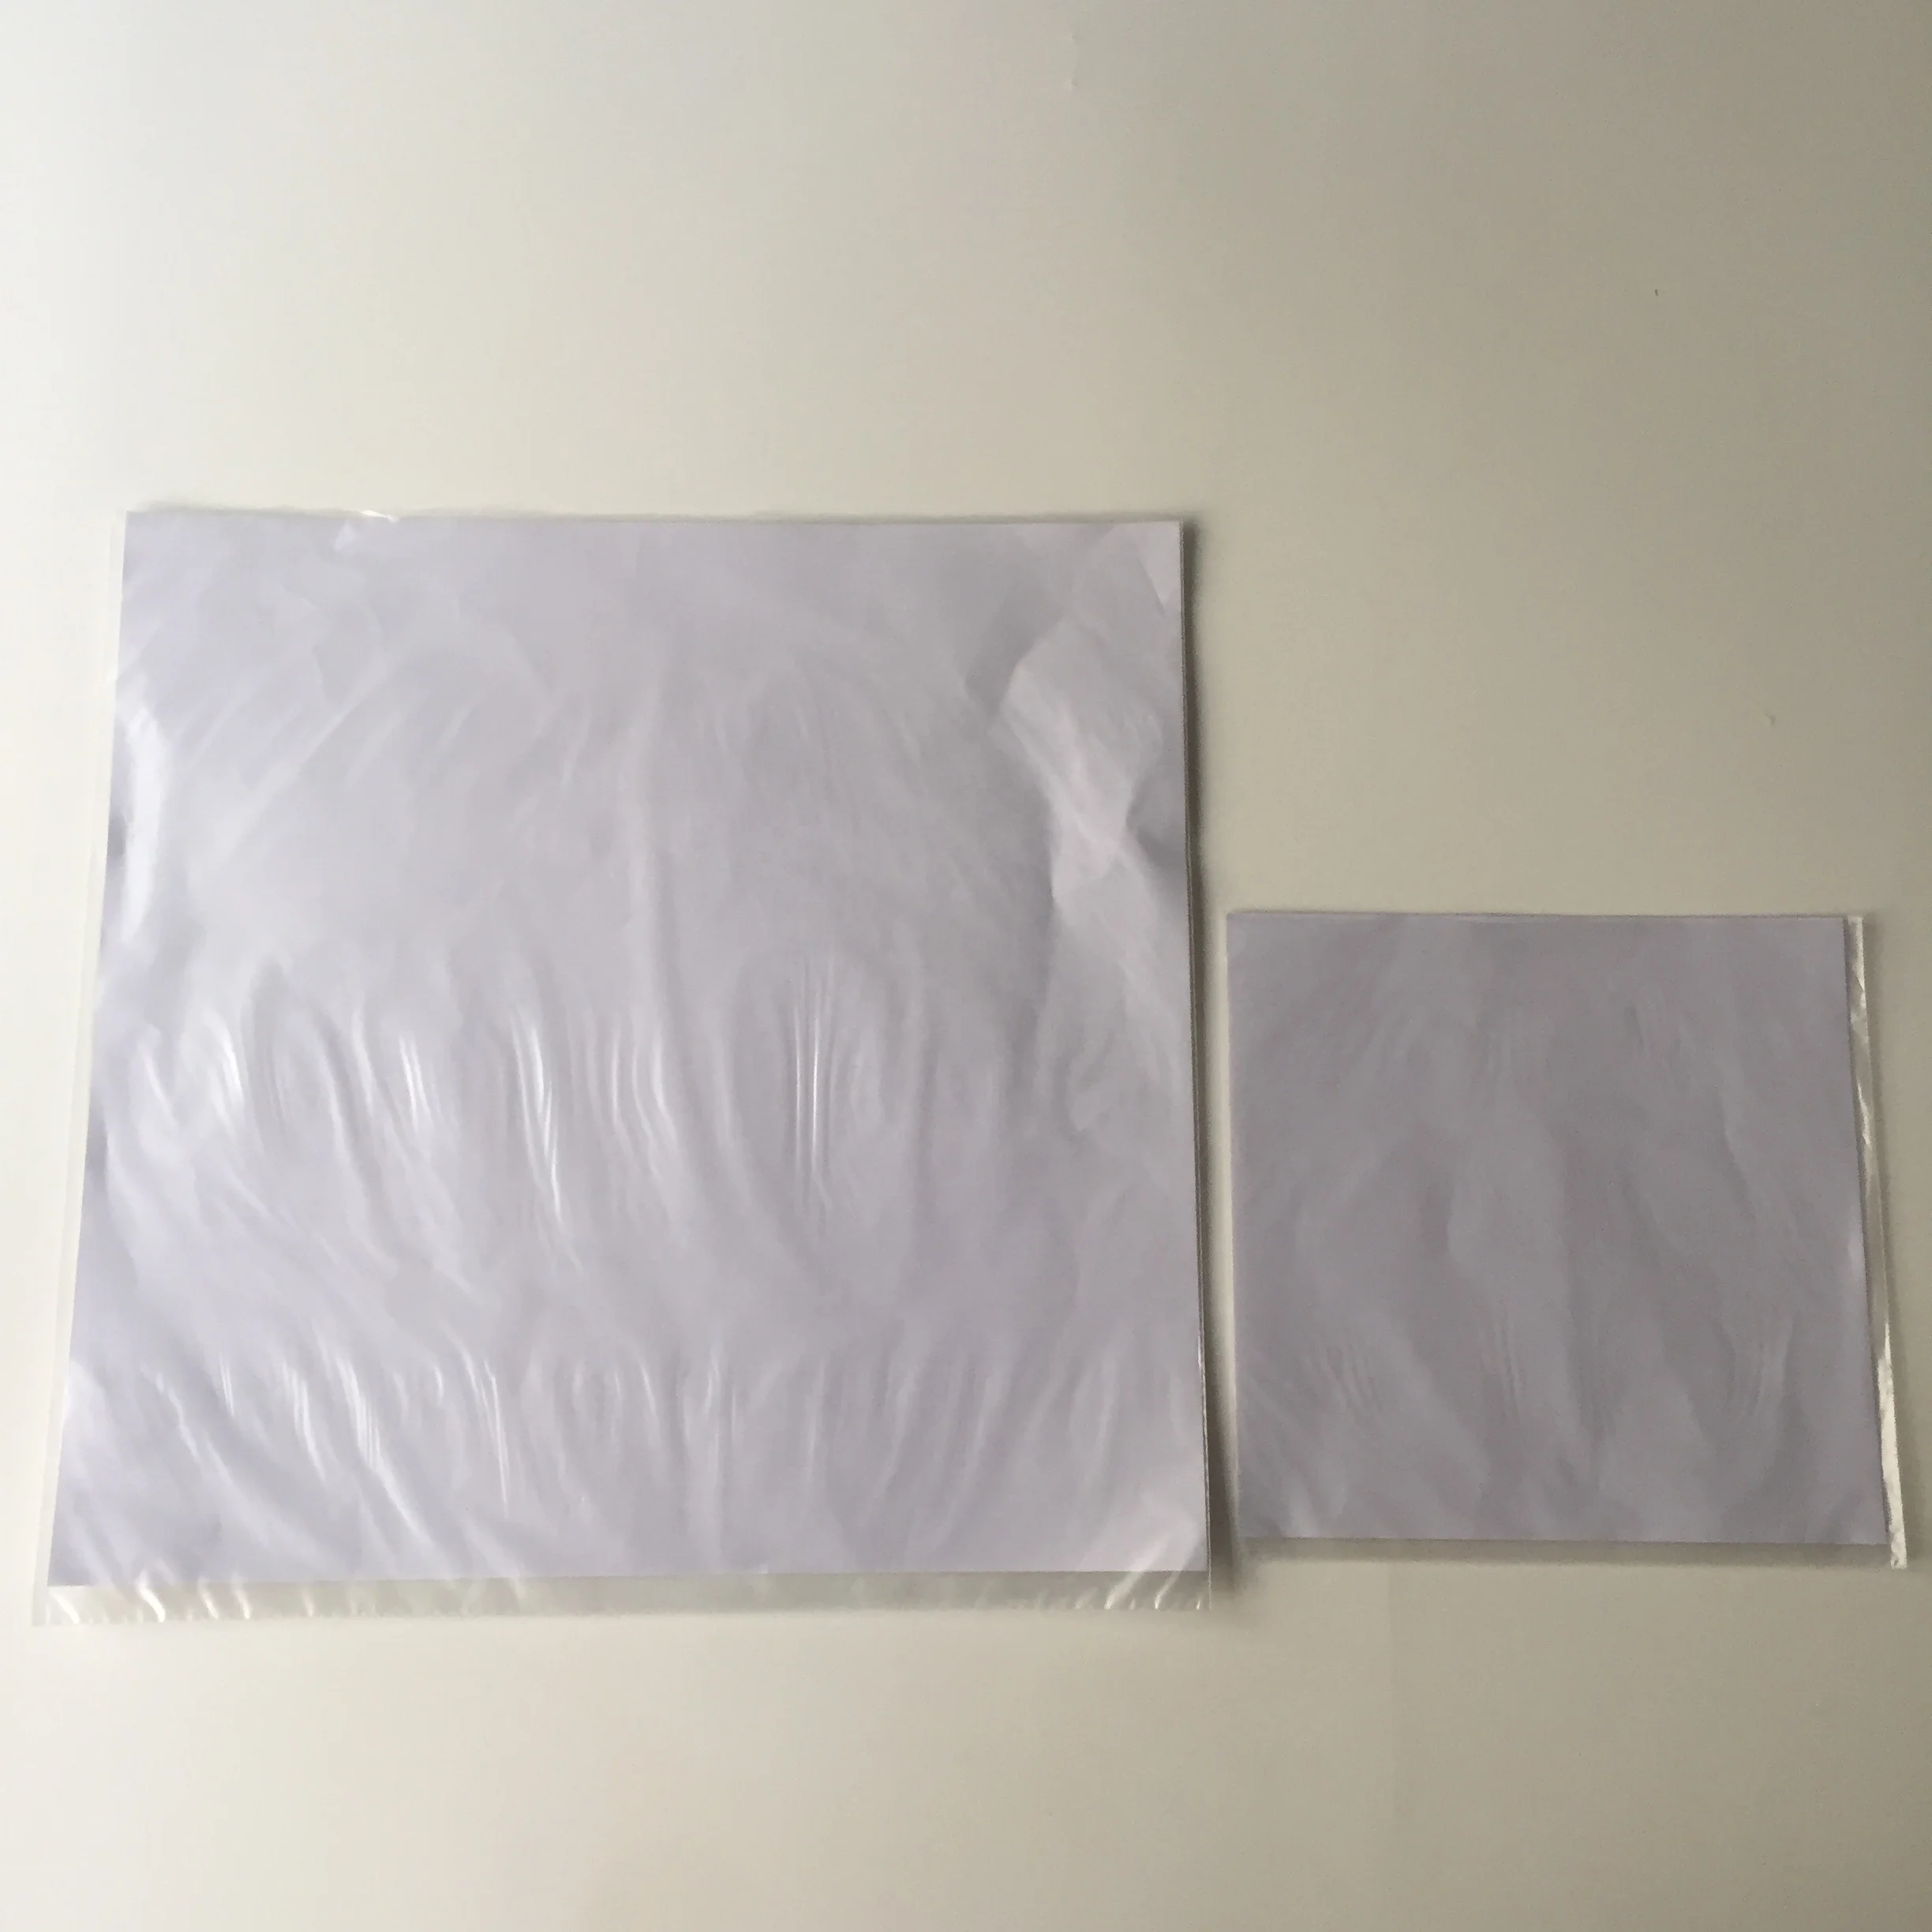 12 Inch 33 RPM LP Vinyl Record Anti-Static Inner Sleeves 3 layers HDPE with Rice Paper